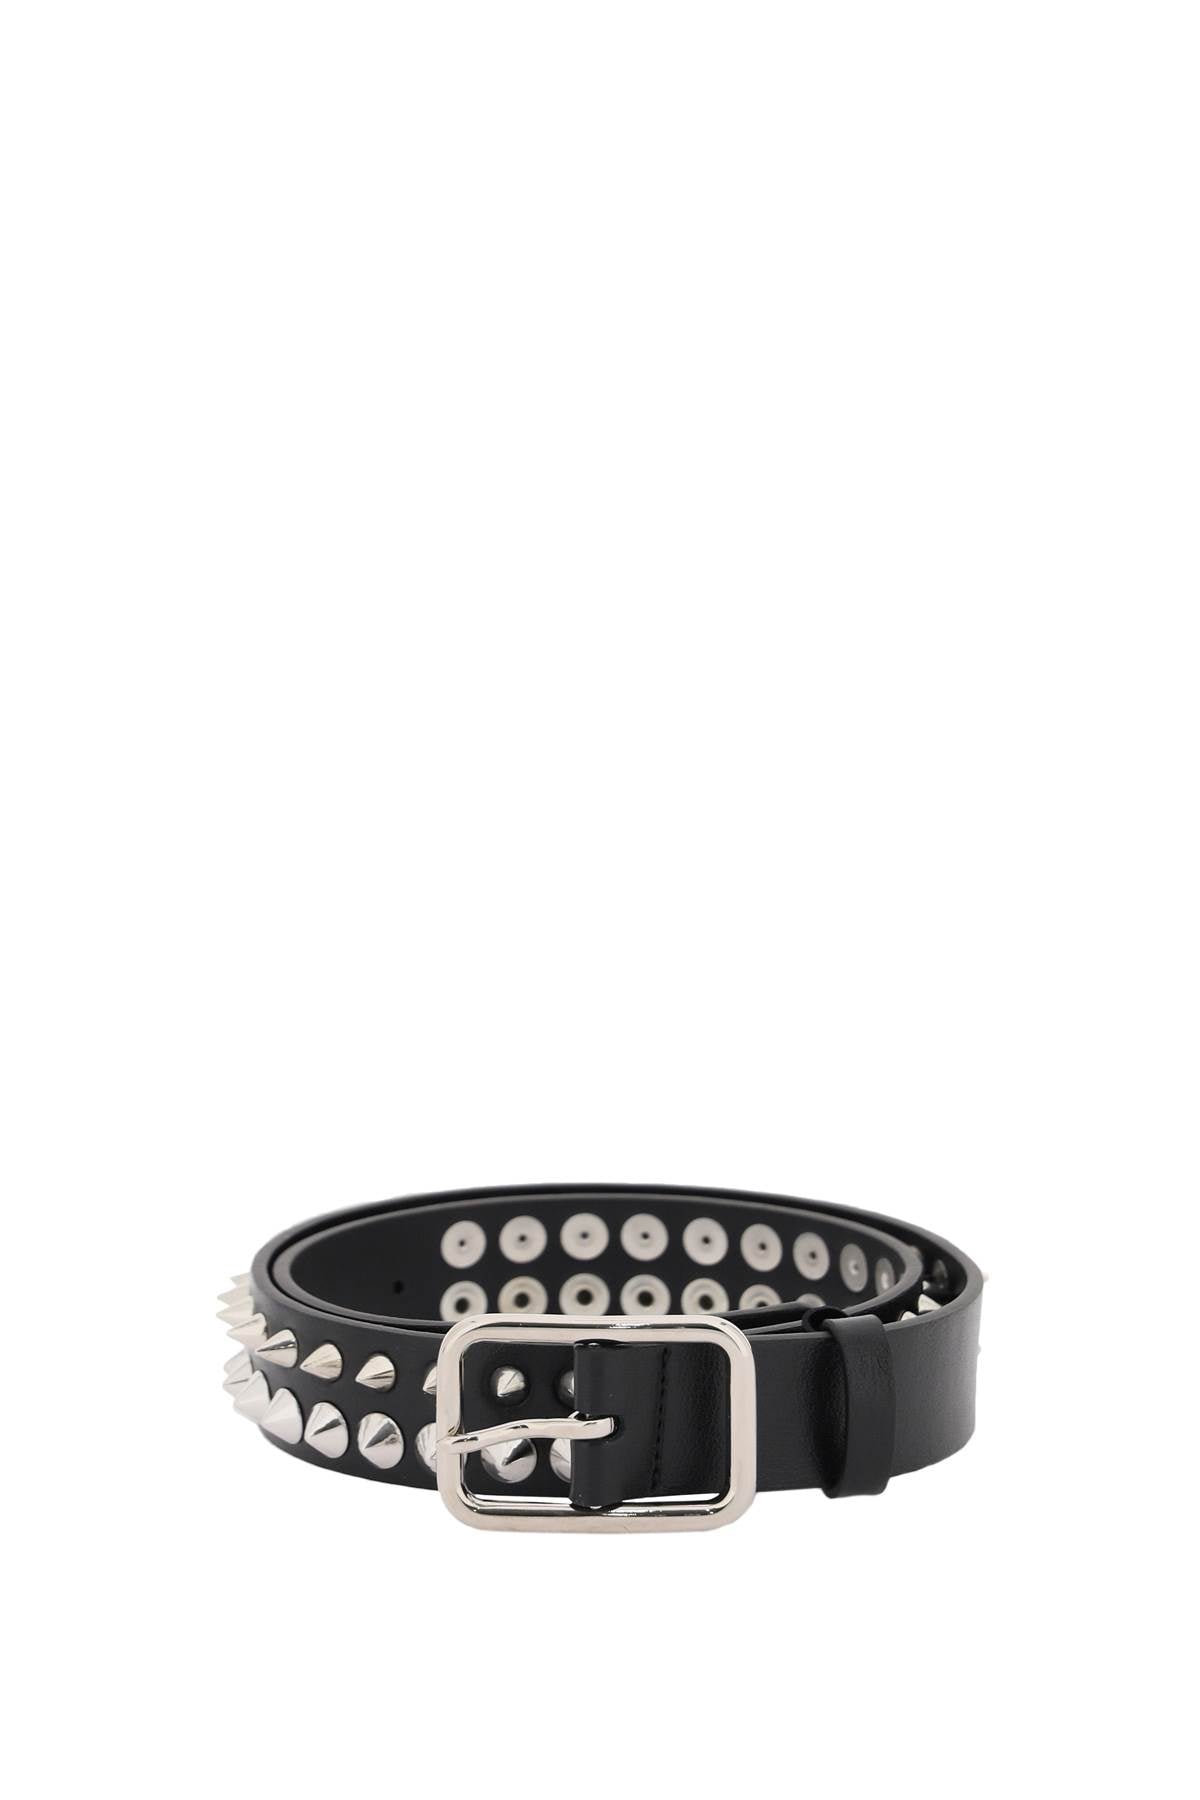 Alessandra rich leather belt with spikes-0